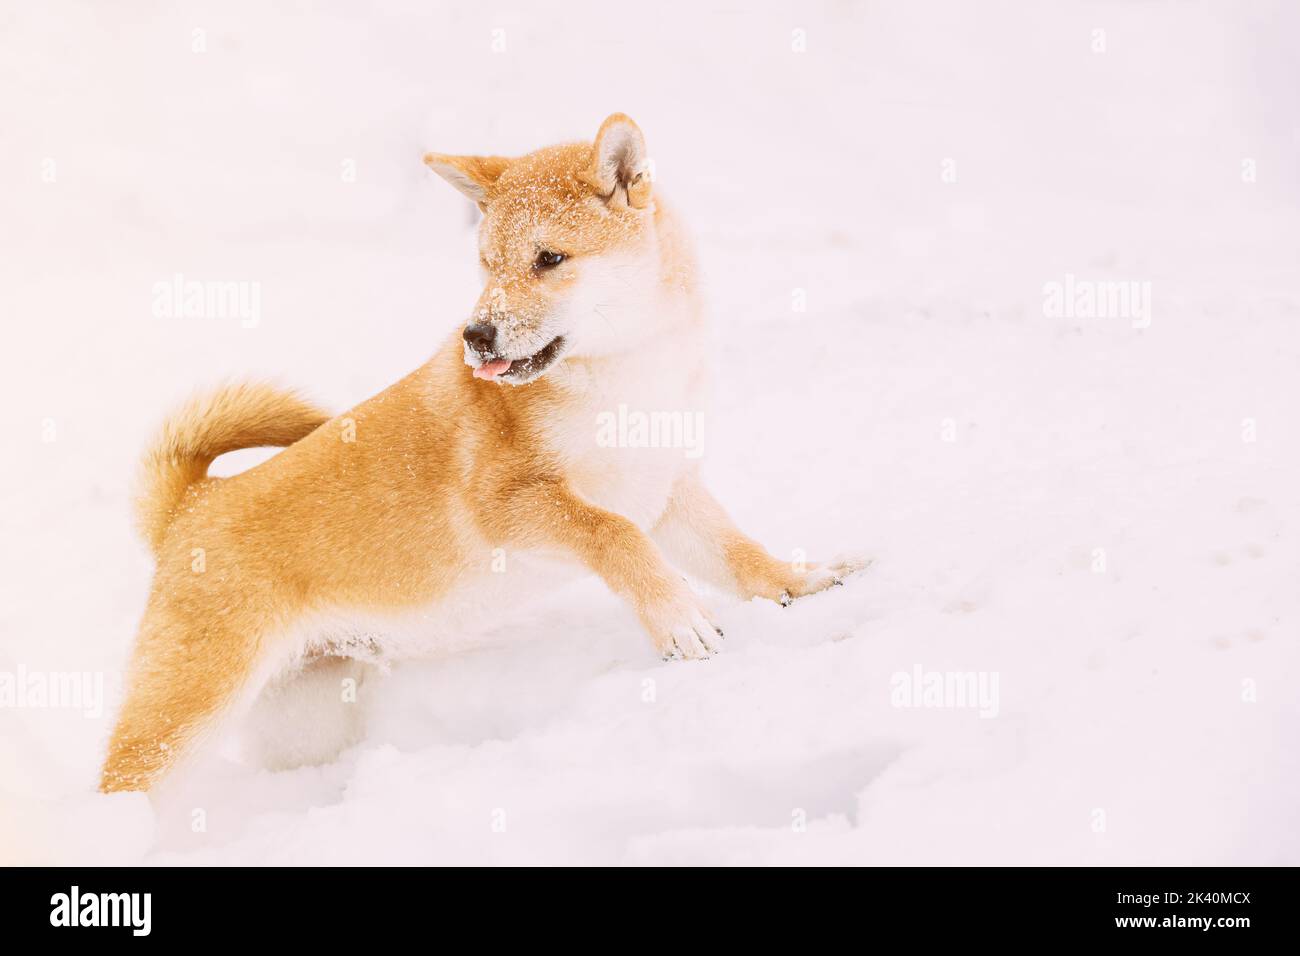 Shiba Inu Playfully Through Snowdrifts. Curious Young Japanese Small Size Shiba Inu Dog Play Outdoor In Snow, Snowdrift At Sunny Winter Day. Copy Stock Photo